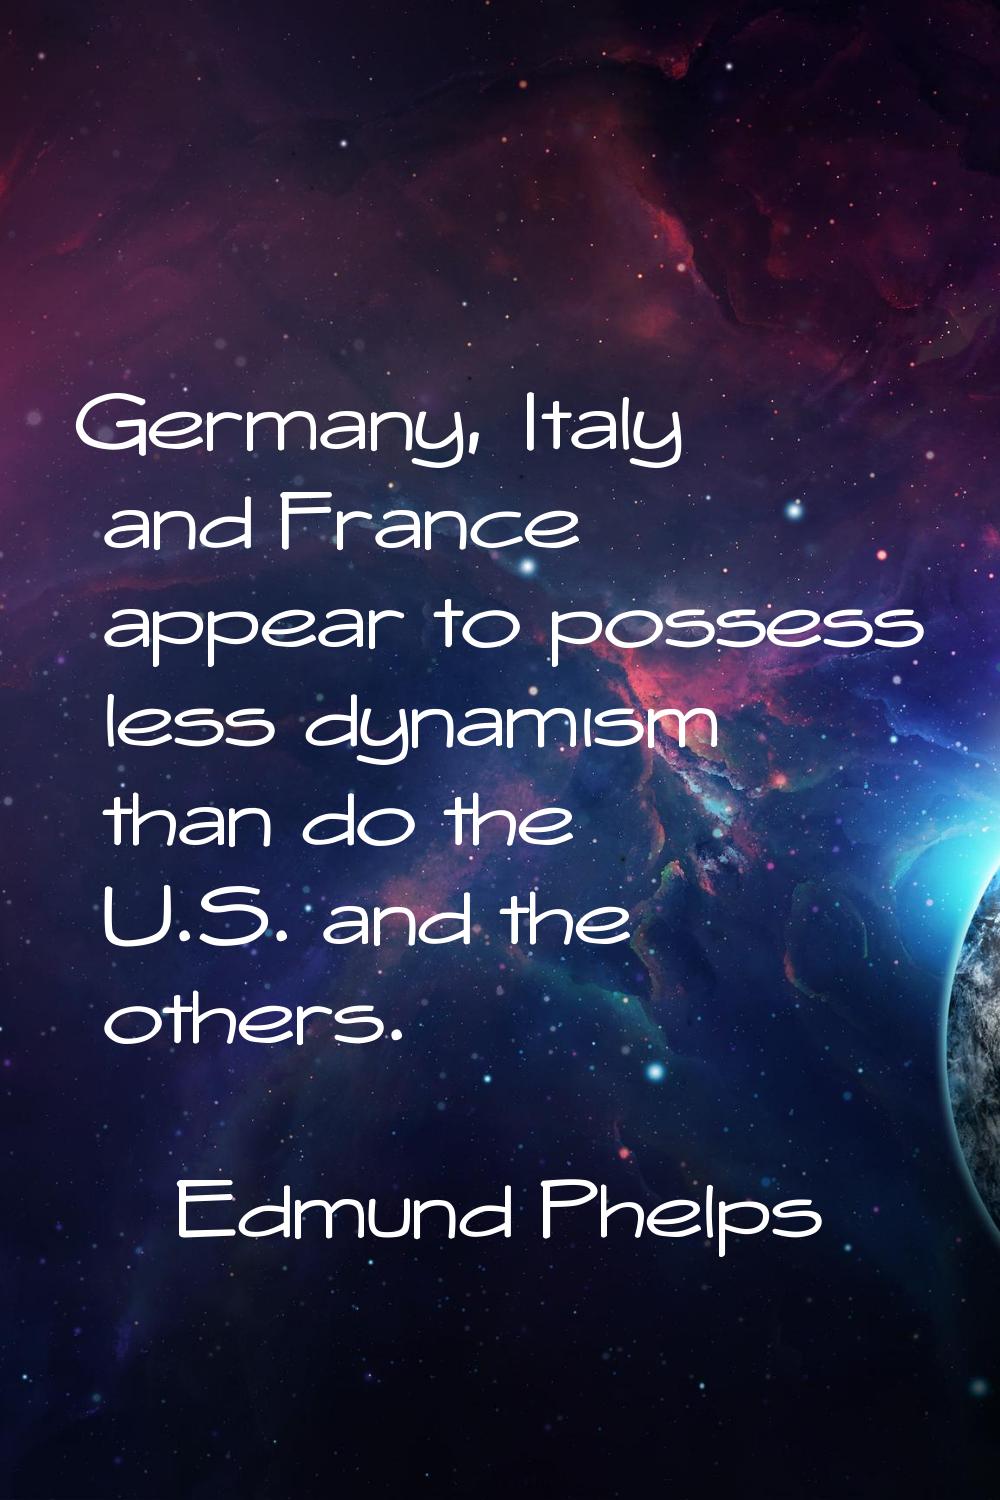 Germany, Italy and France appear to possess less dynamism than do the U.S. and the others.